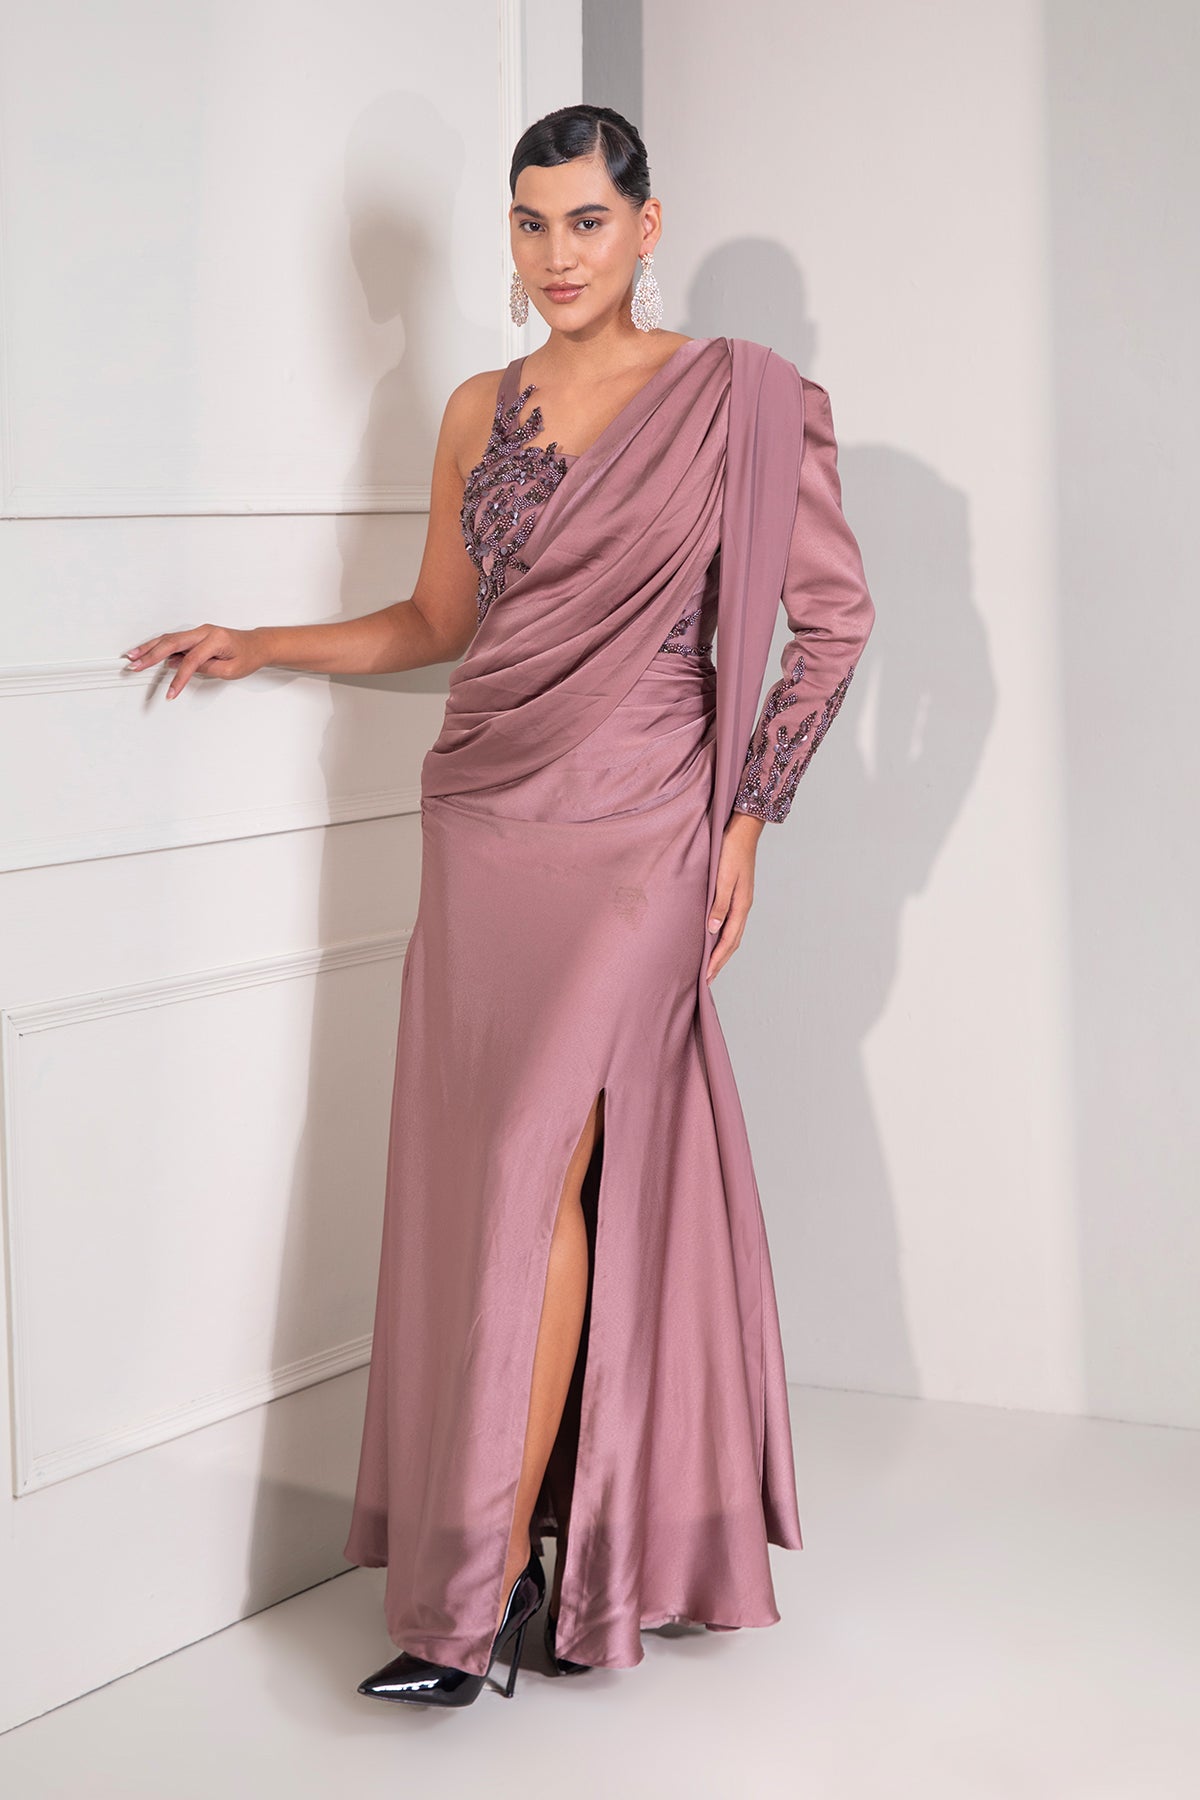 Dusty Mauve draped gown with dramatic Blazer sleeves & tonal embroidery